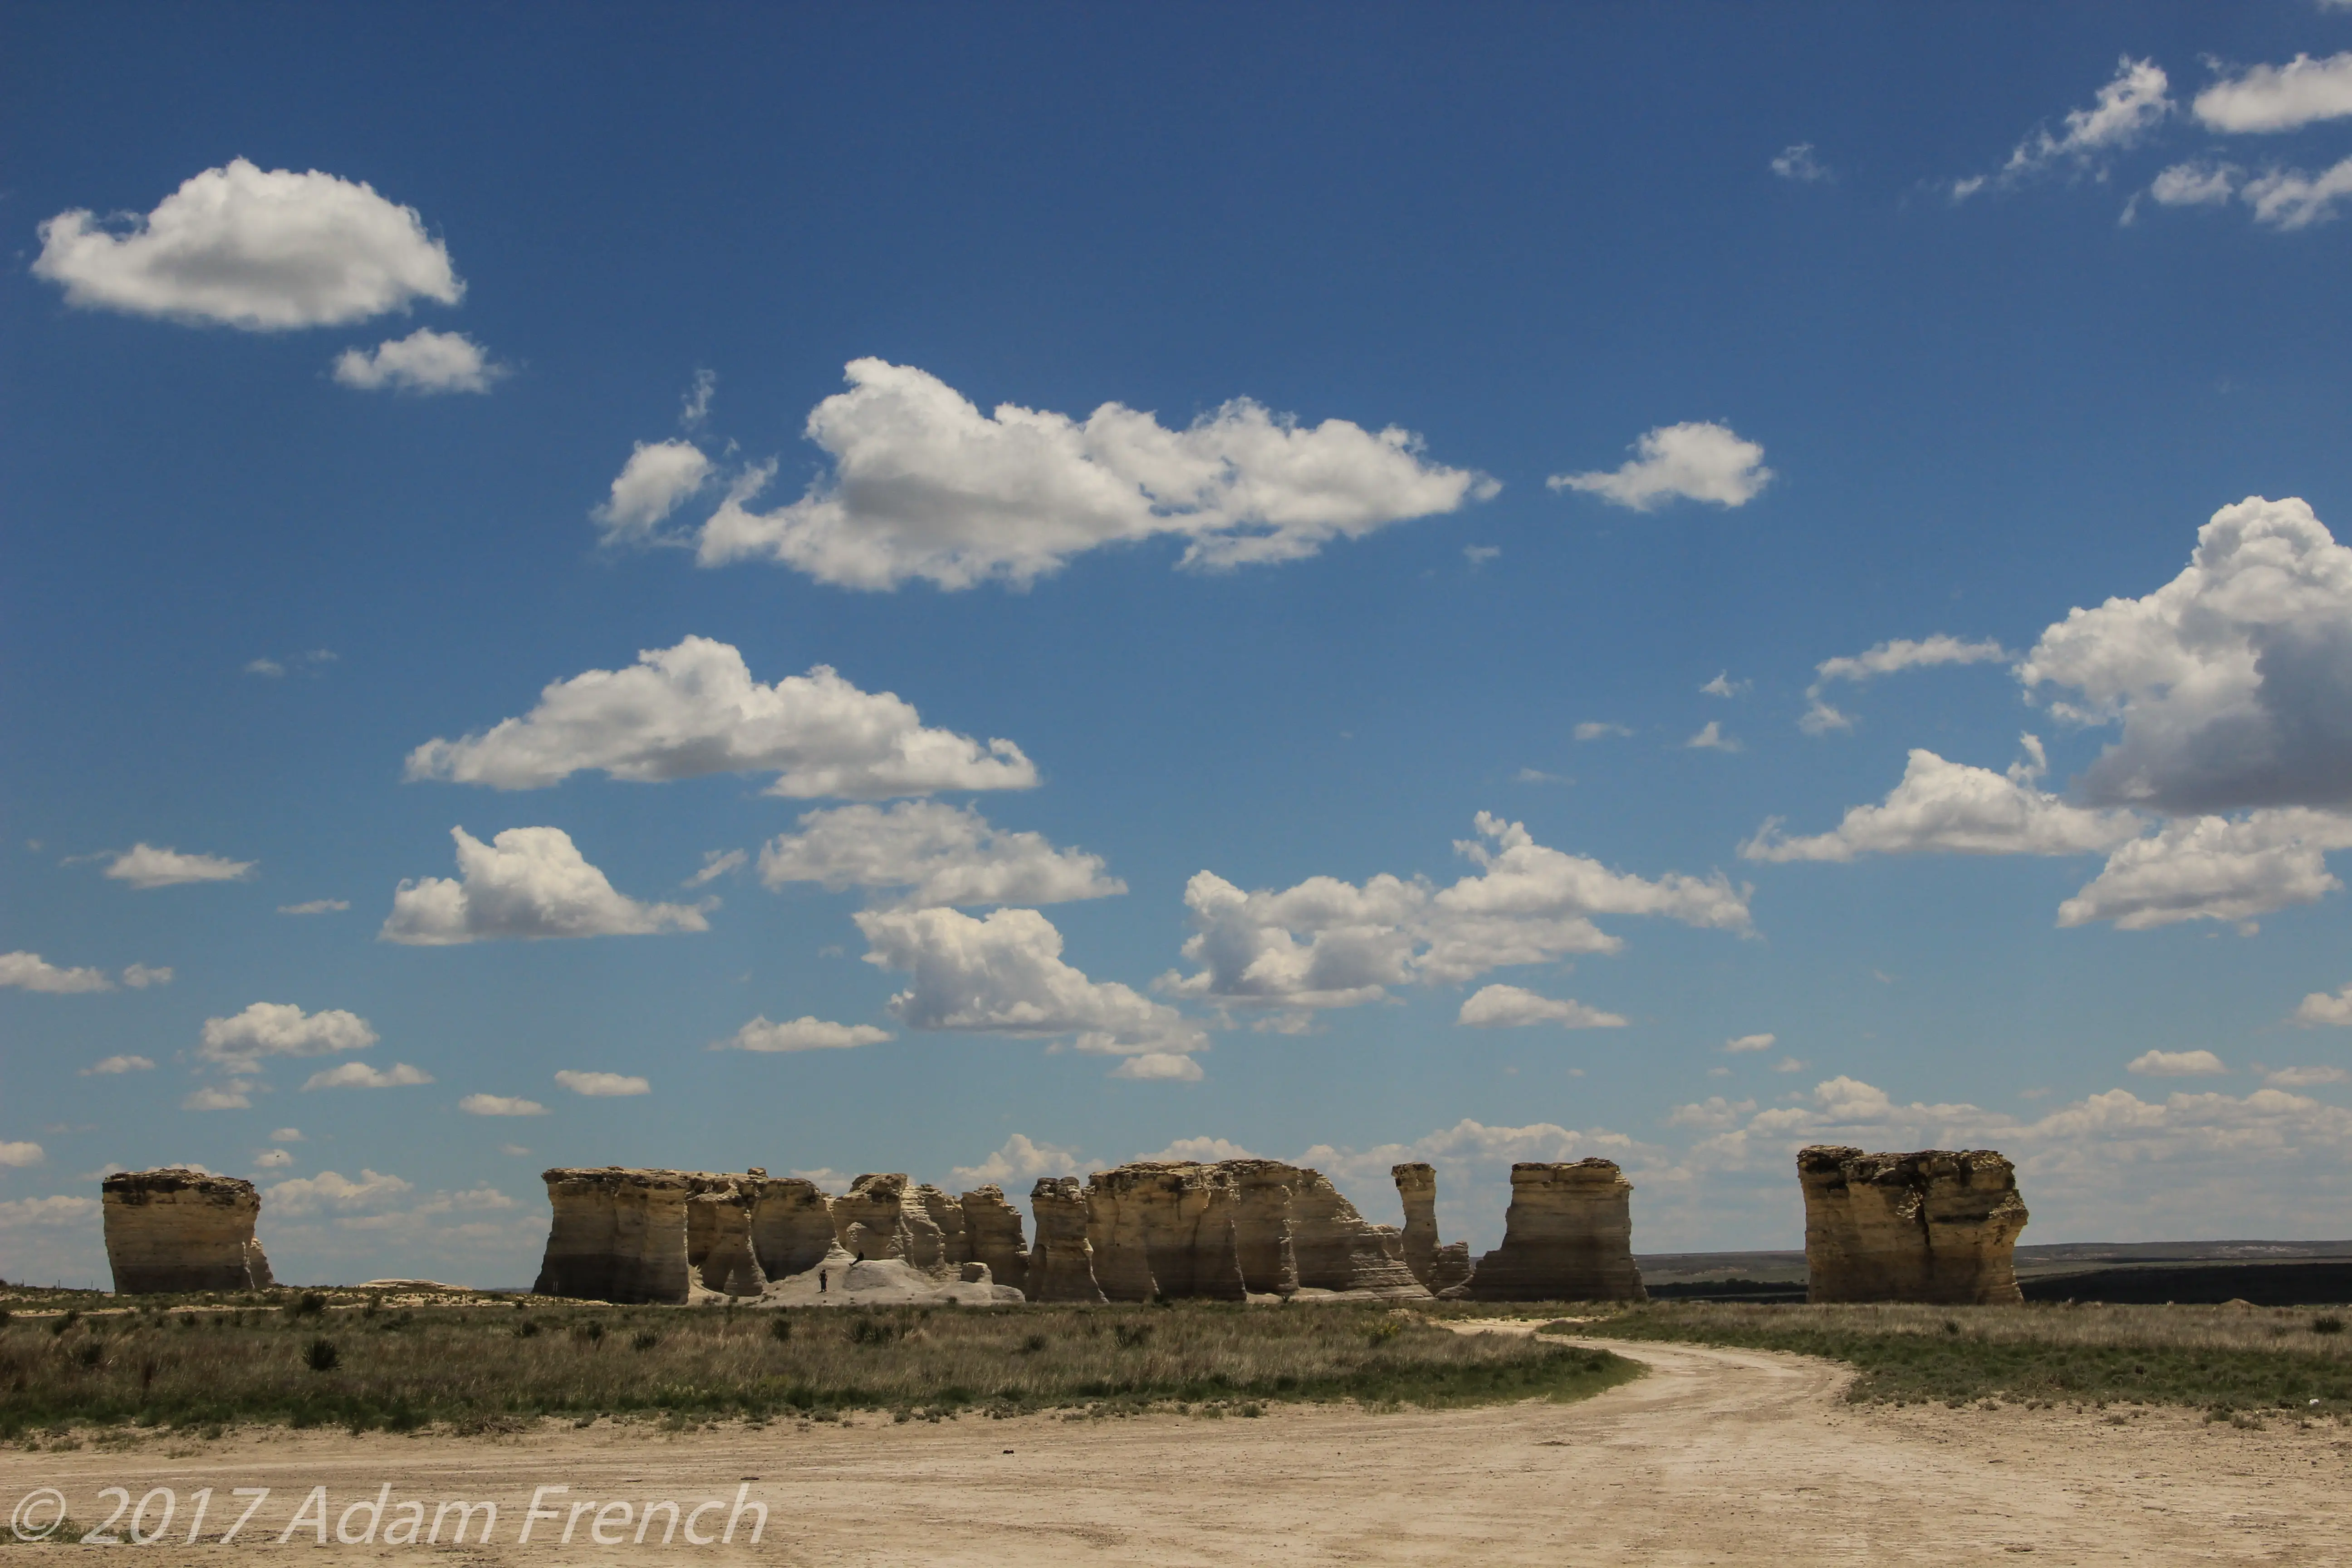 White, rock spires rise from the ground in a sandy, desert-like area